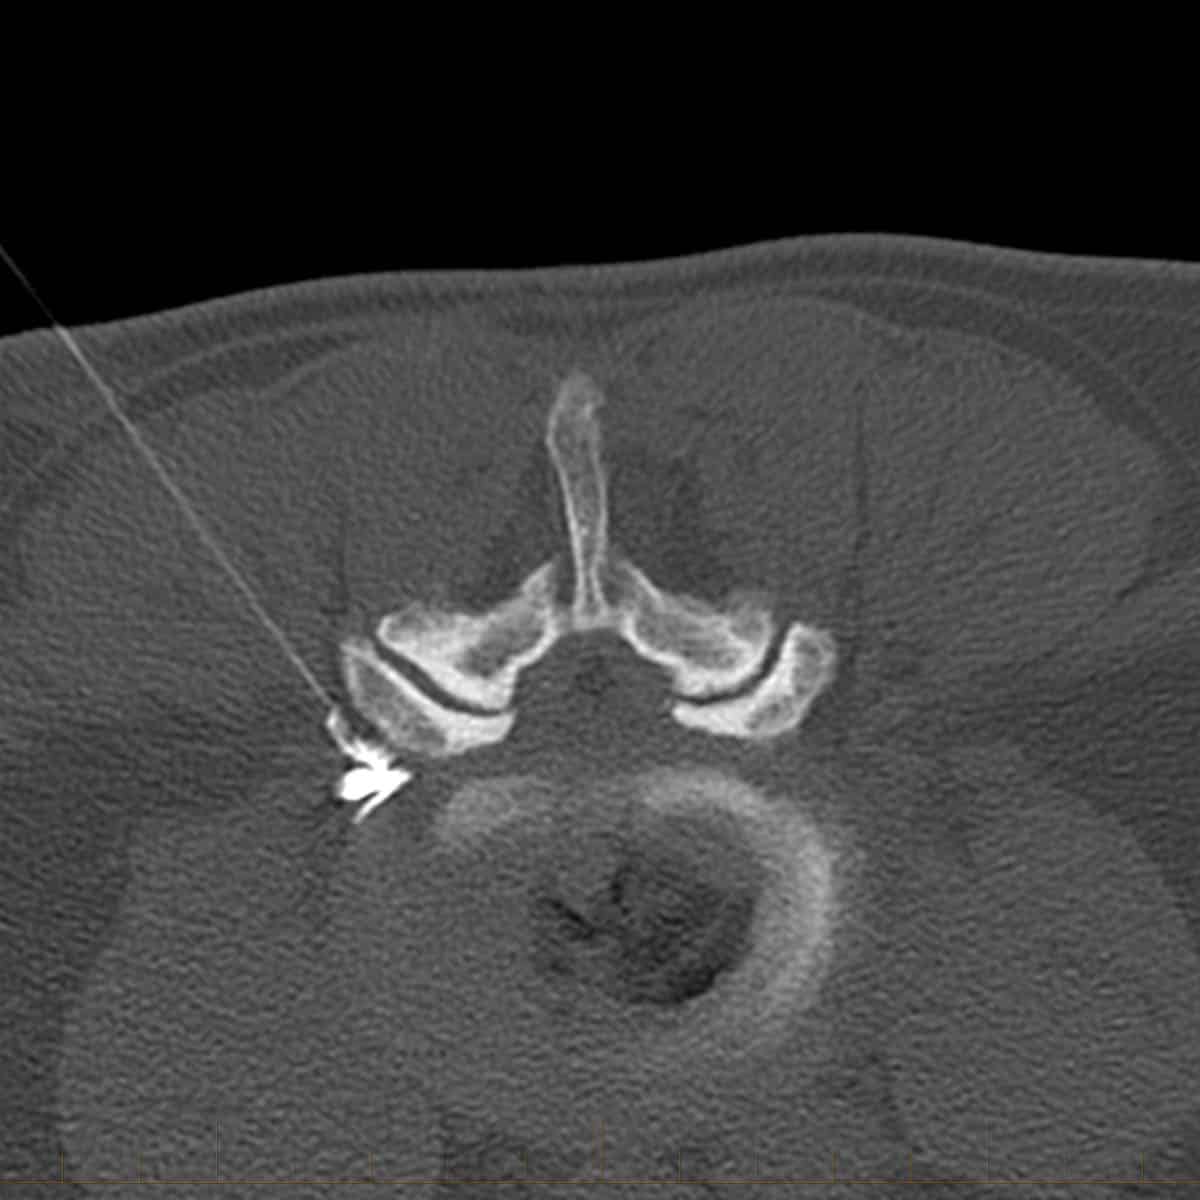 CT guided left L4 selective nerve root block (SNRB) lumbar spine